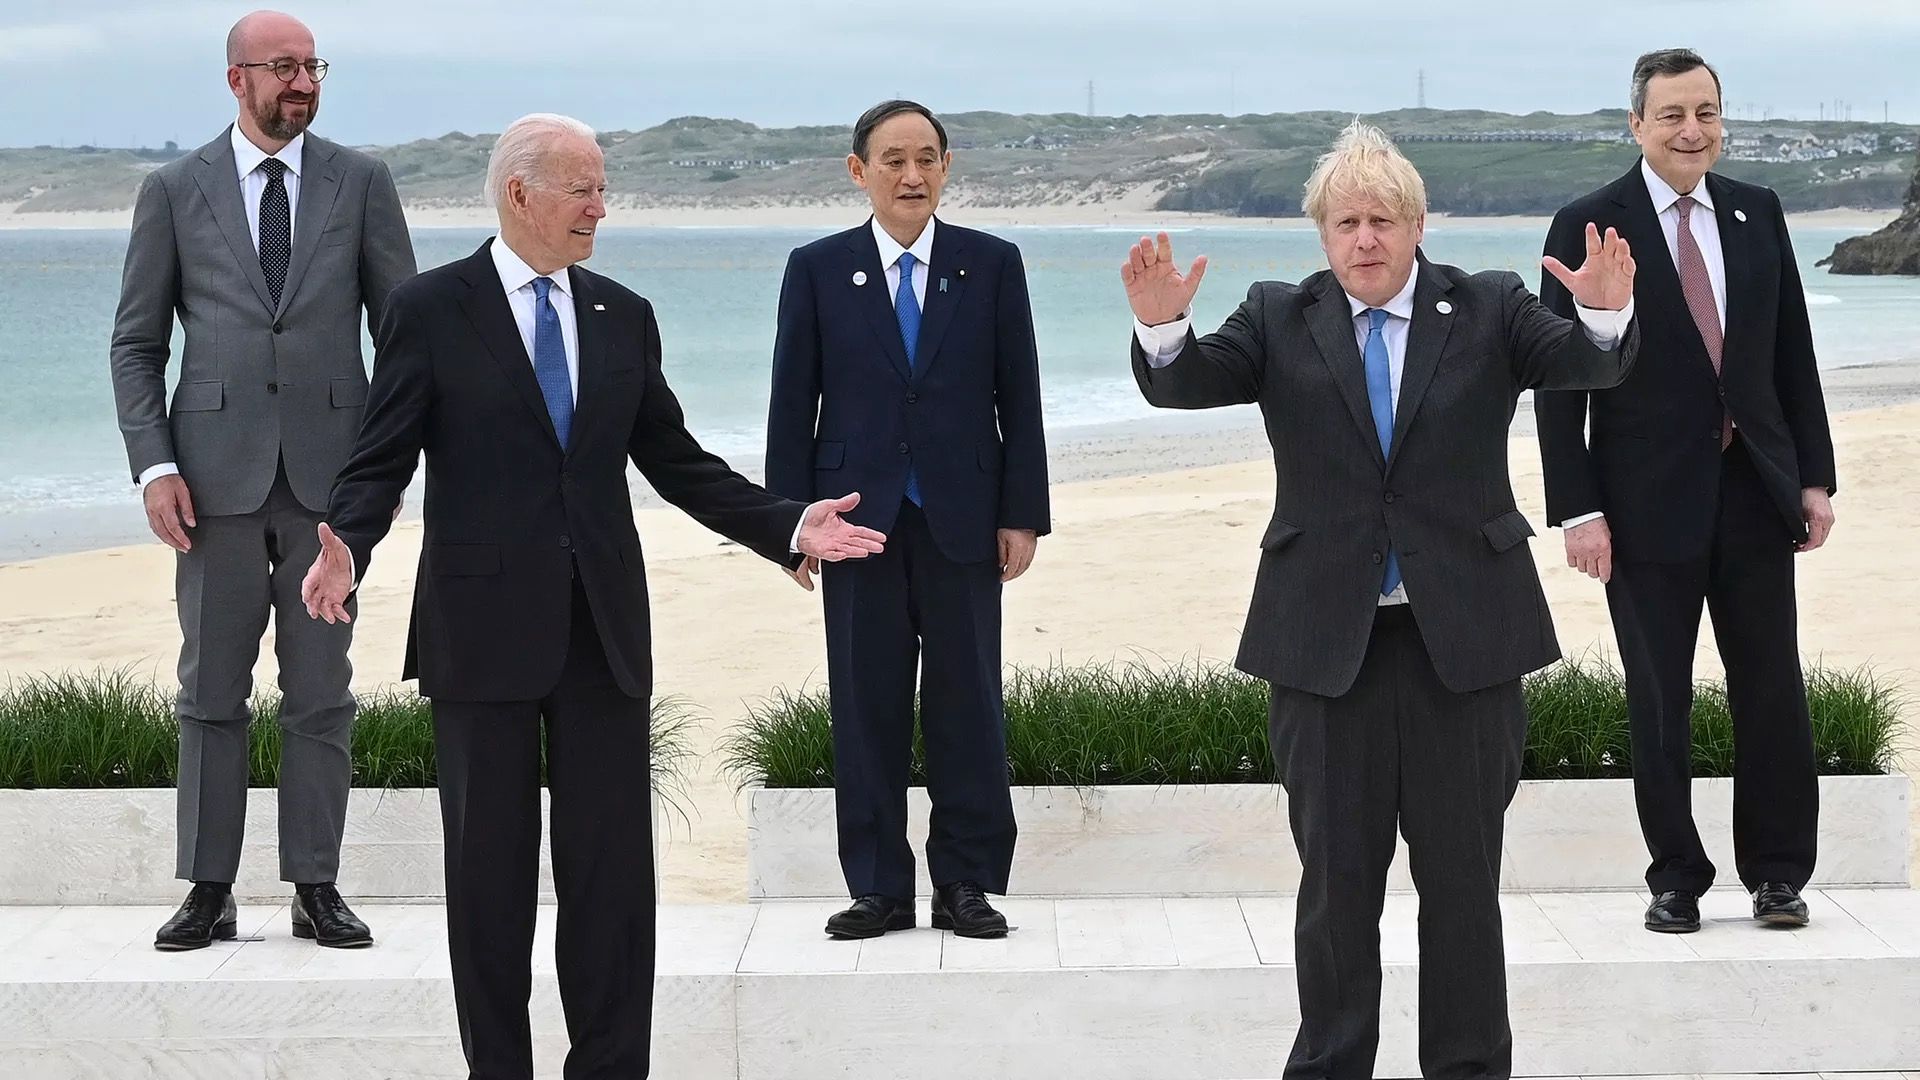 President Biden is seen with British Prime Minister Boris Johnson during the G7 summit in the U.K.